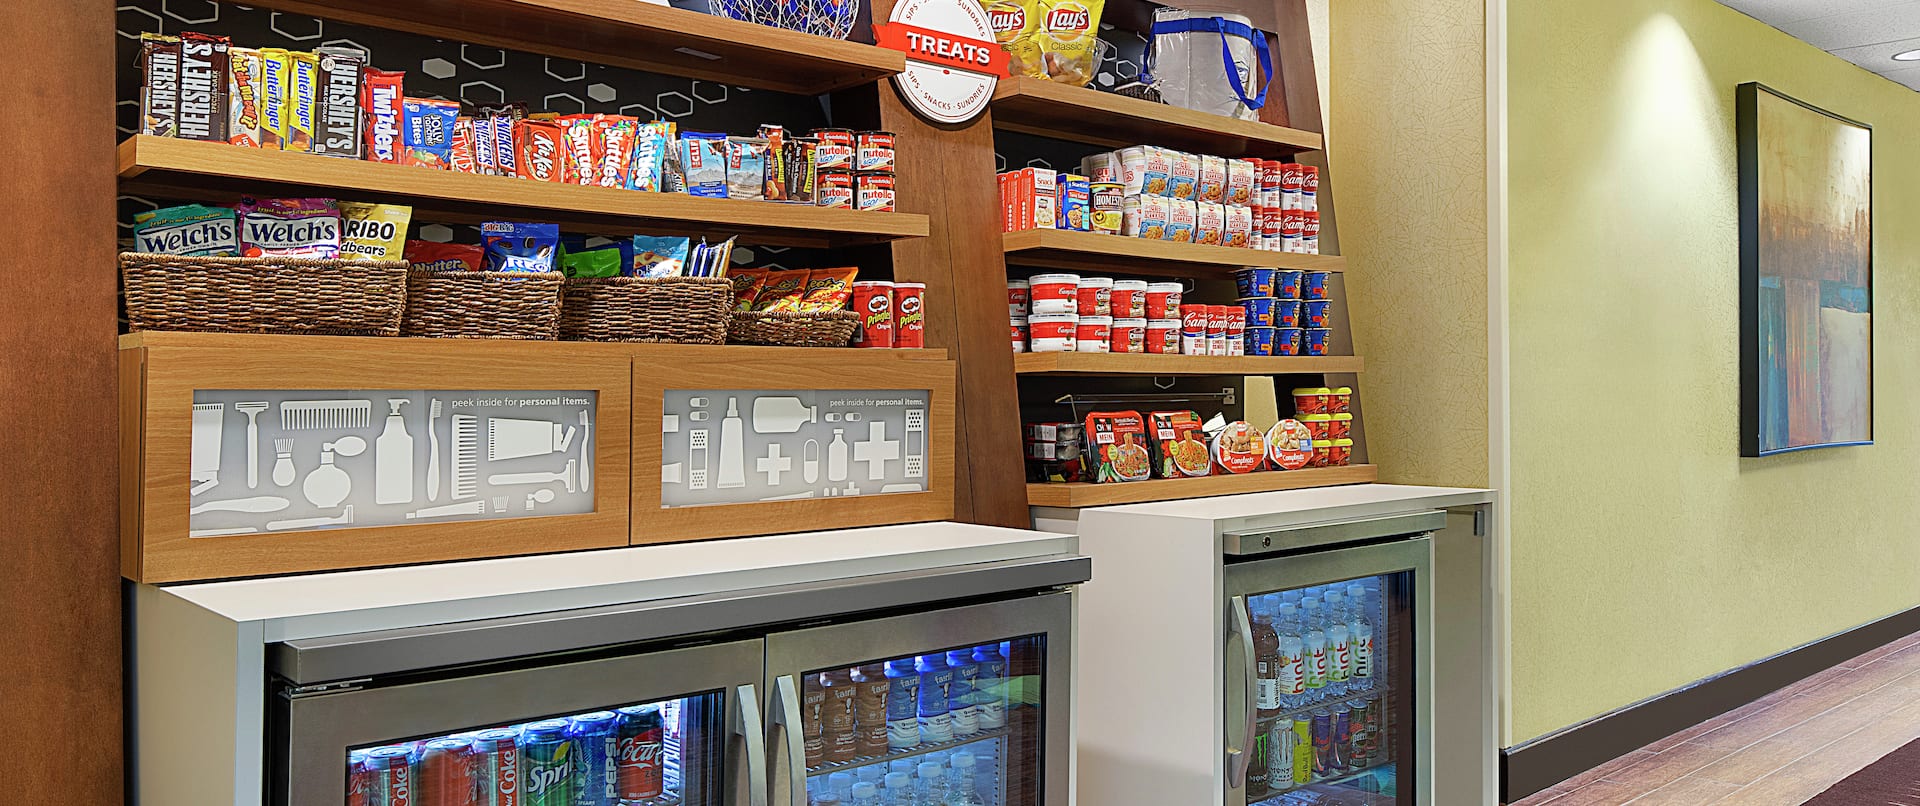 Snacks and Beverages on Display in Snack Shop